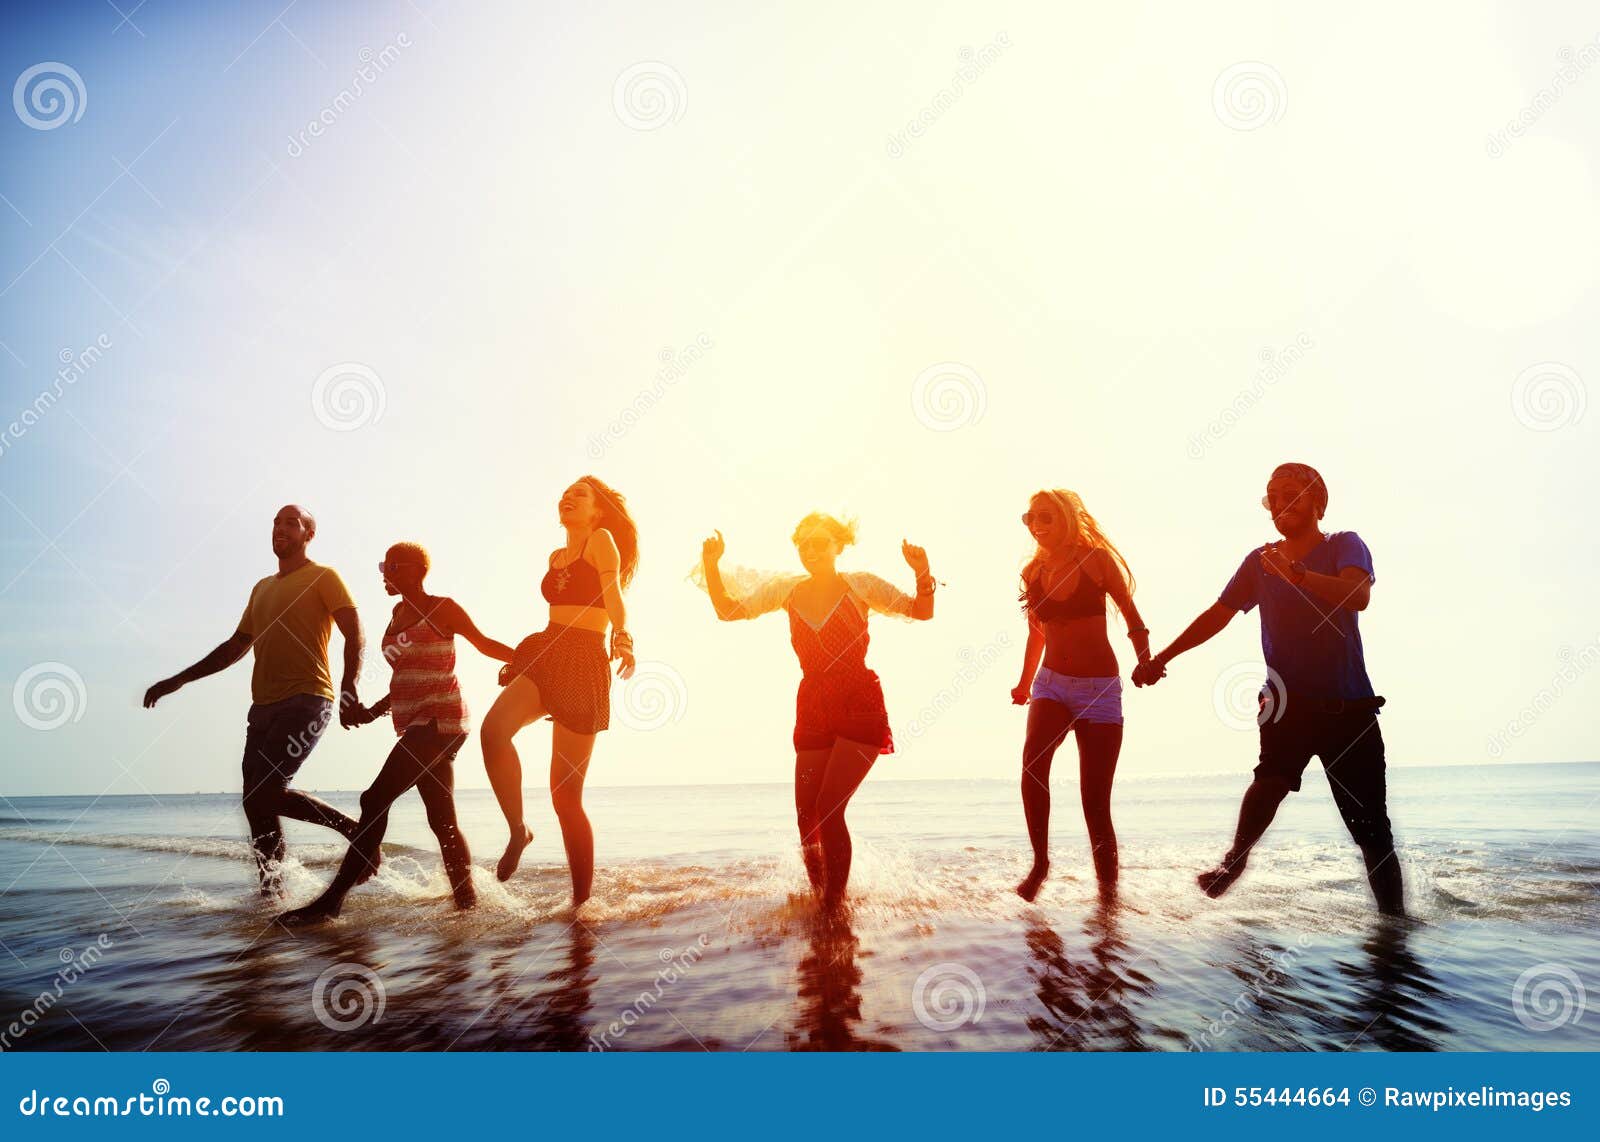 Friendship Freedom Beach Summer Holiday Concept Stock Photo - Image of